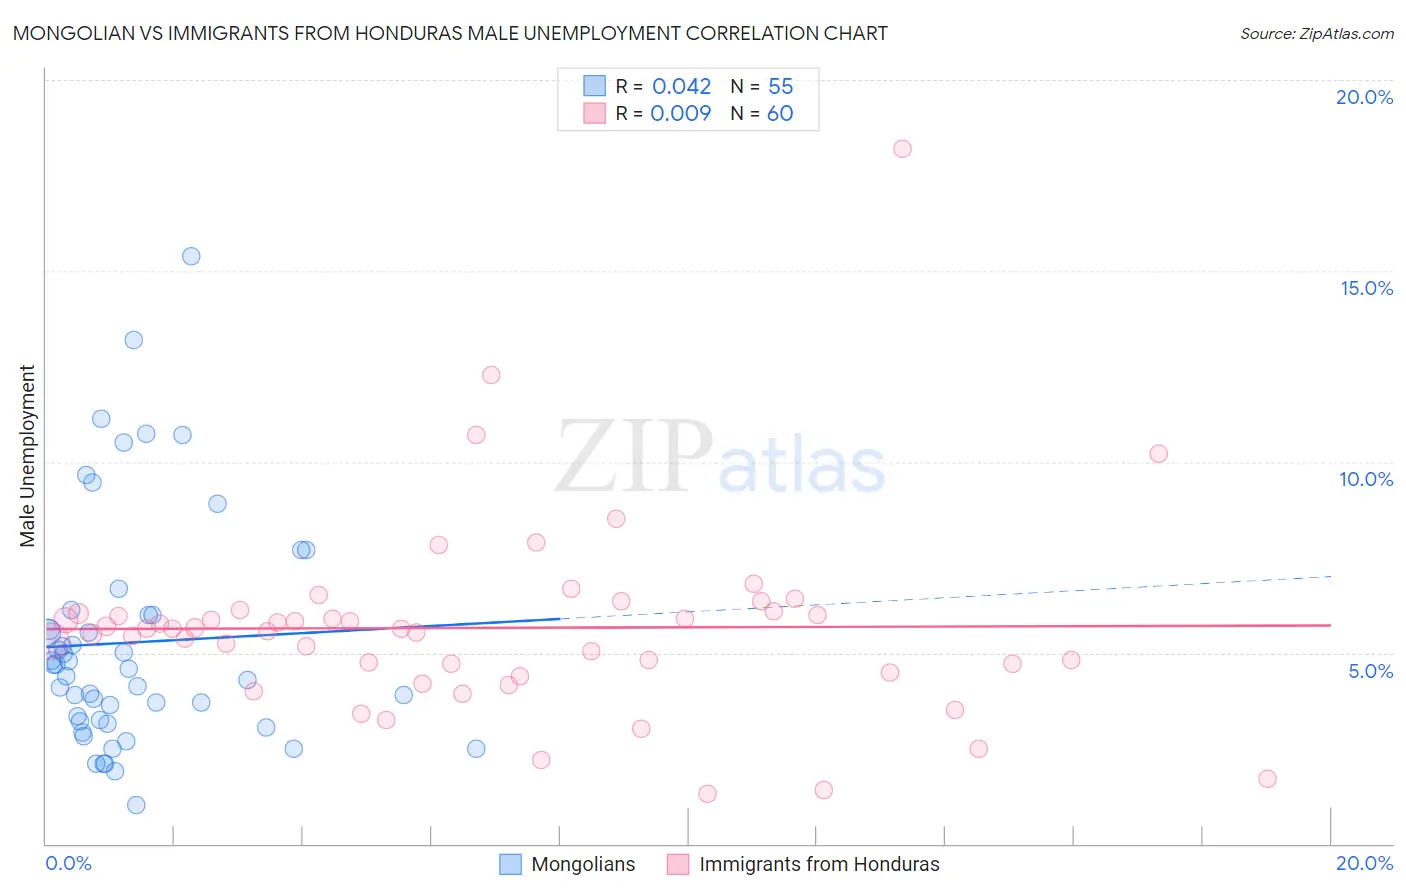 Mongolian vs Immigrants from Honduras Male Unemployment